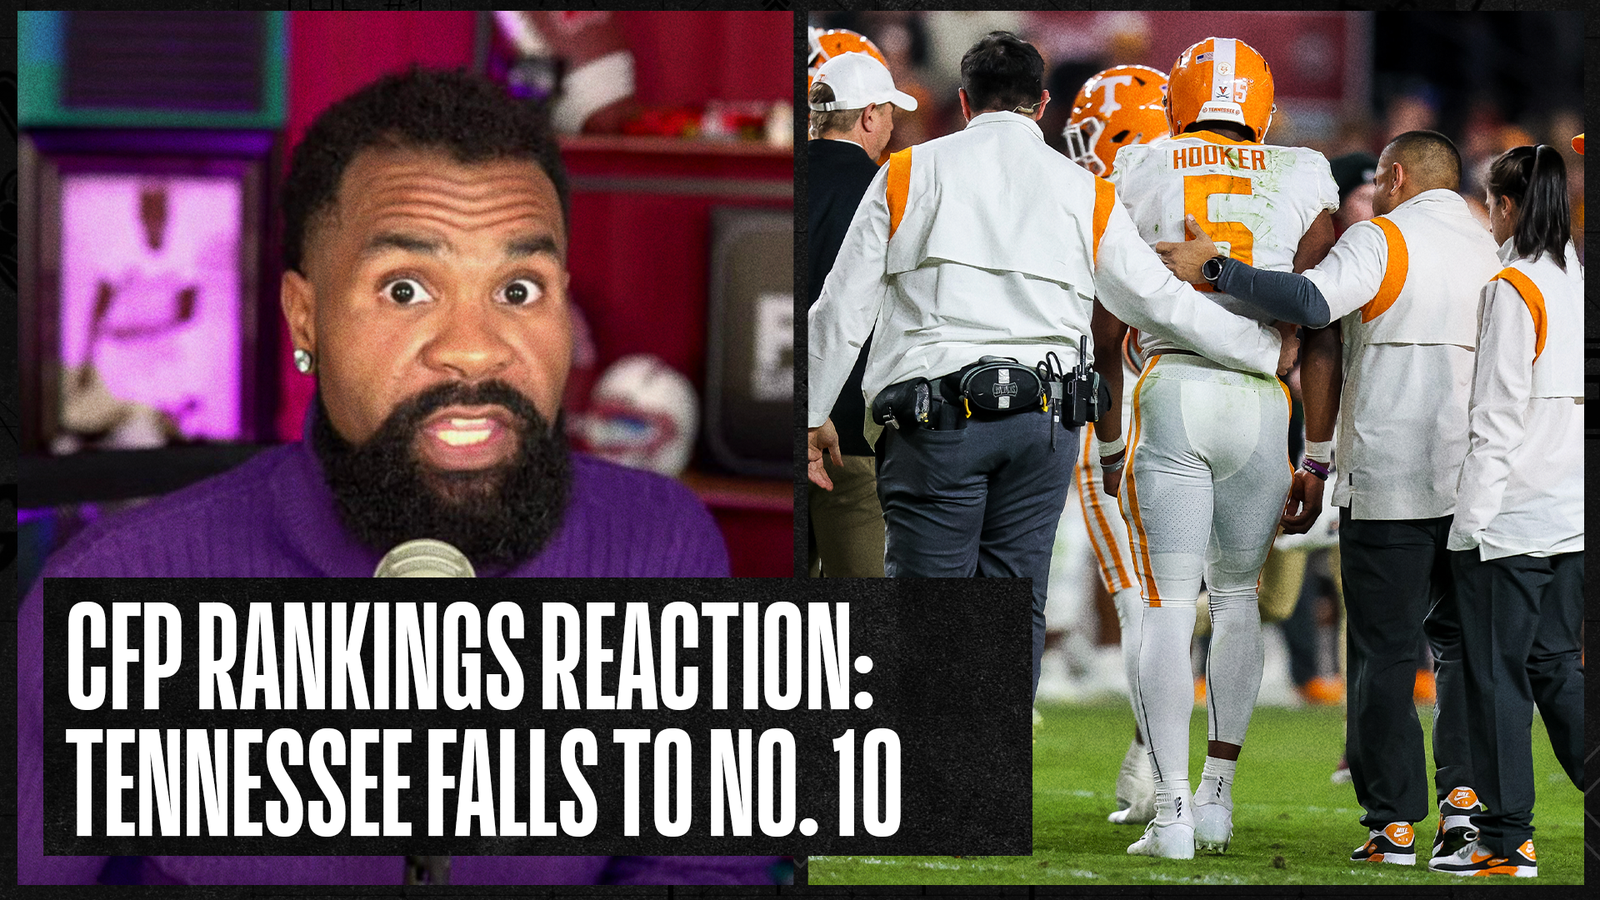 CFP Ranking Reaction: Tennessee drops to No. 10